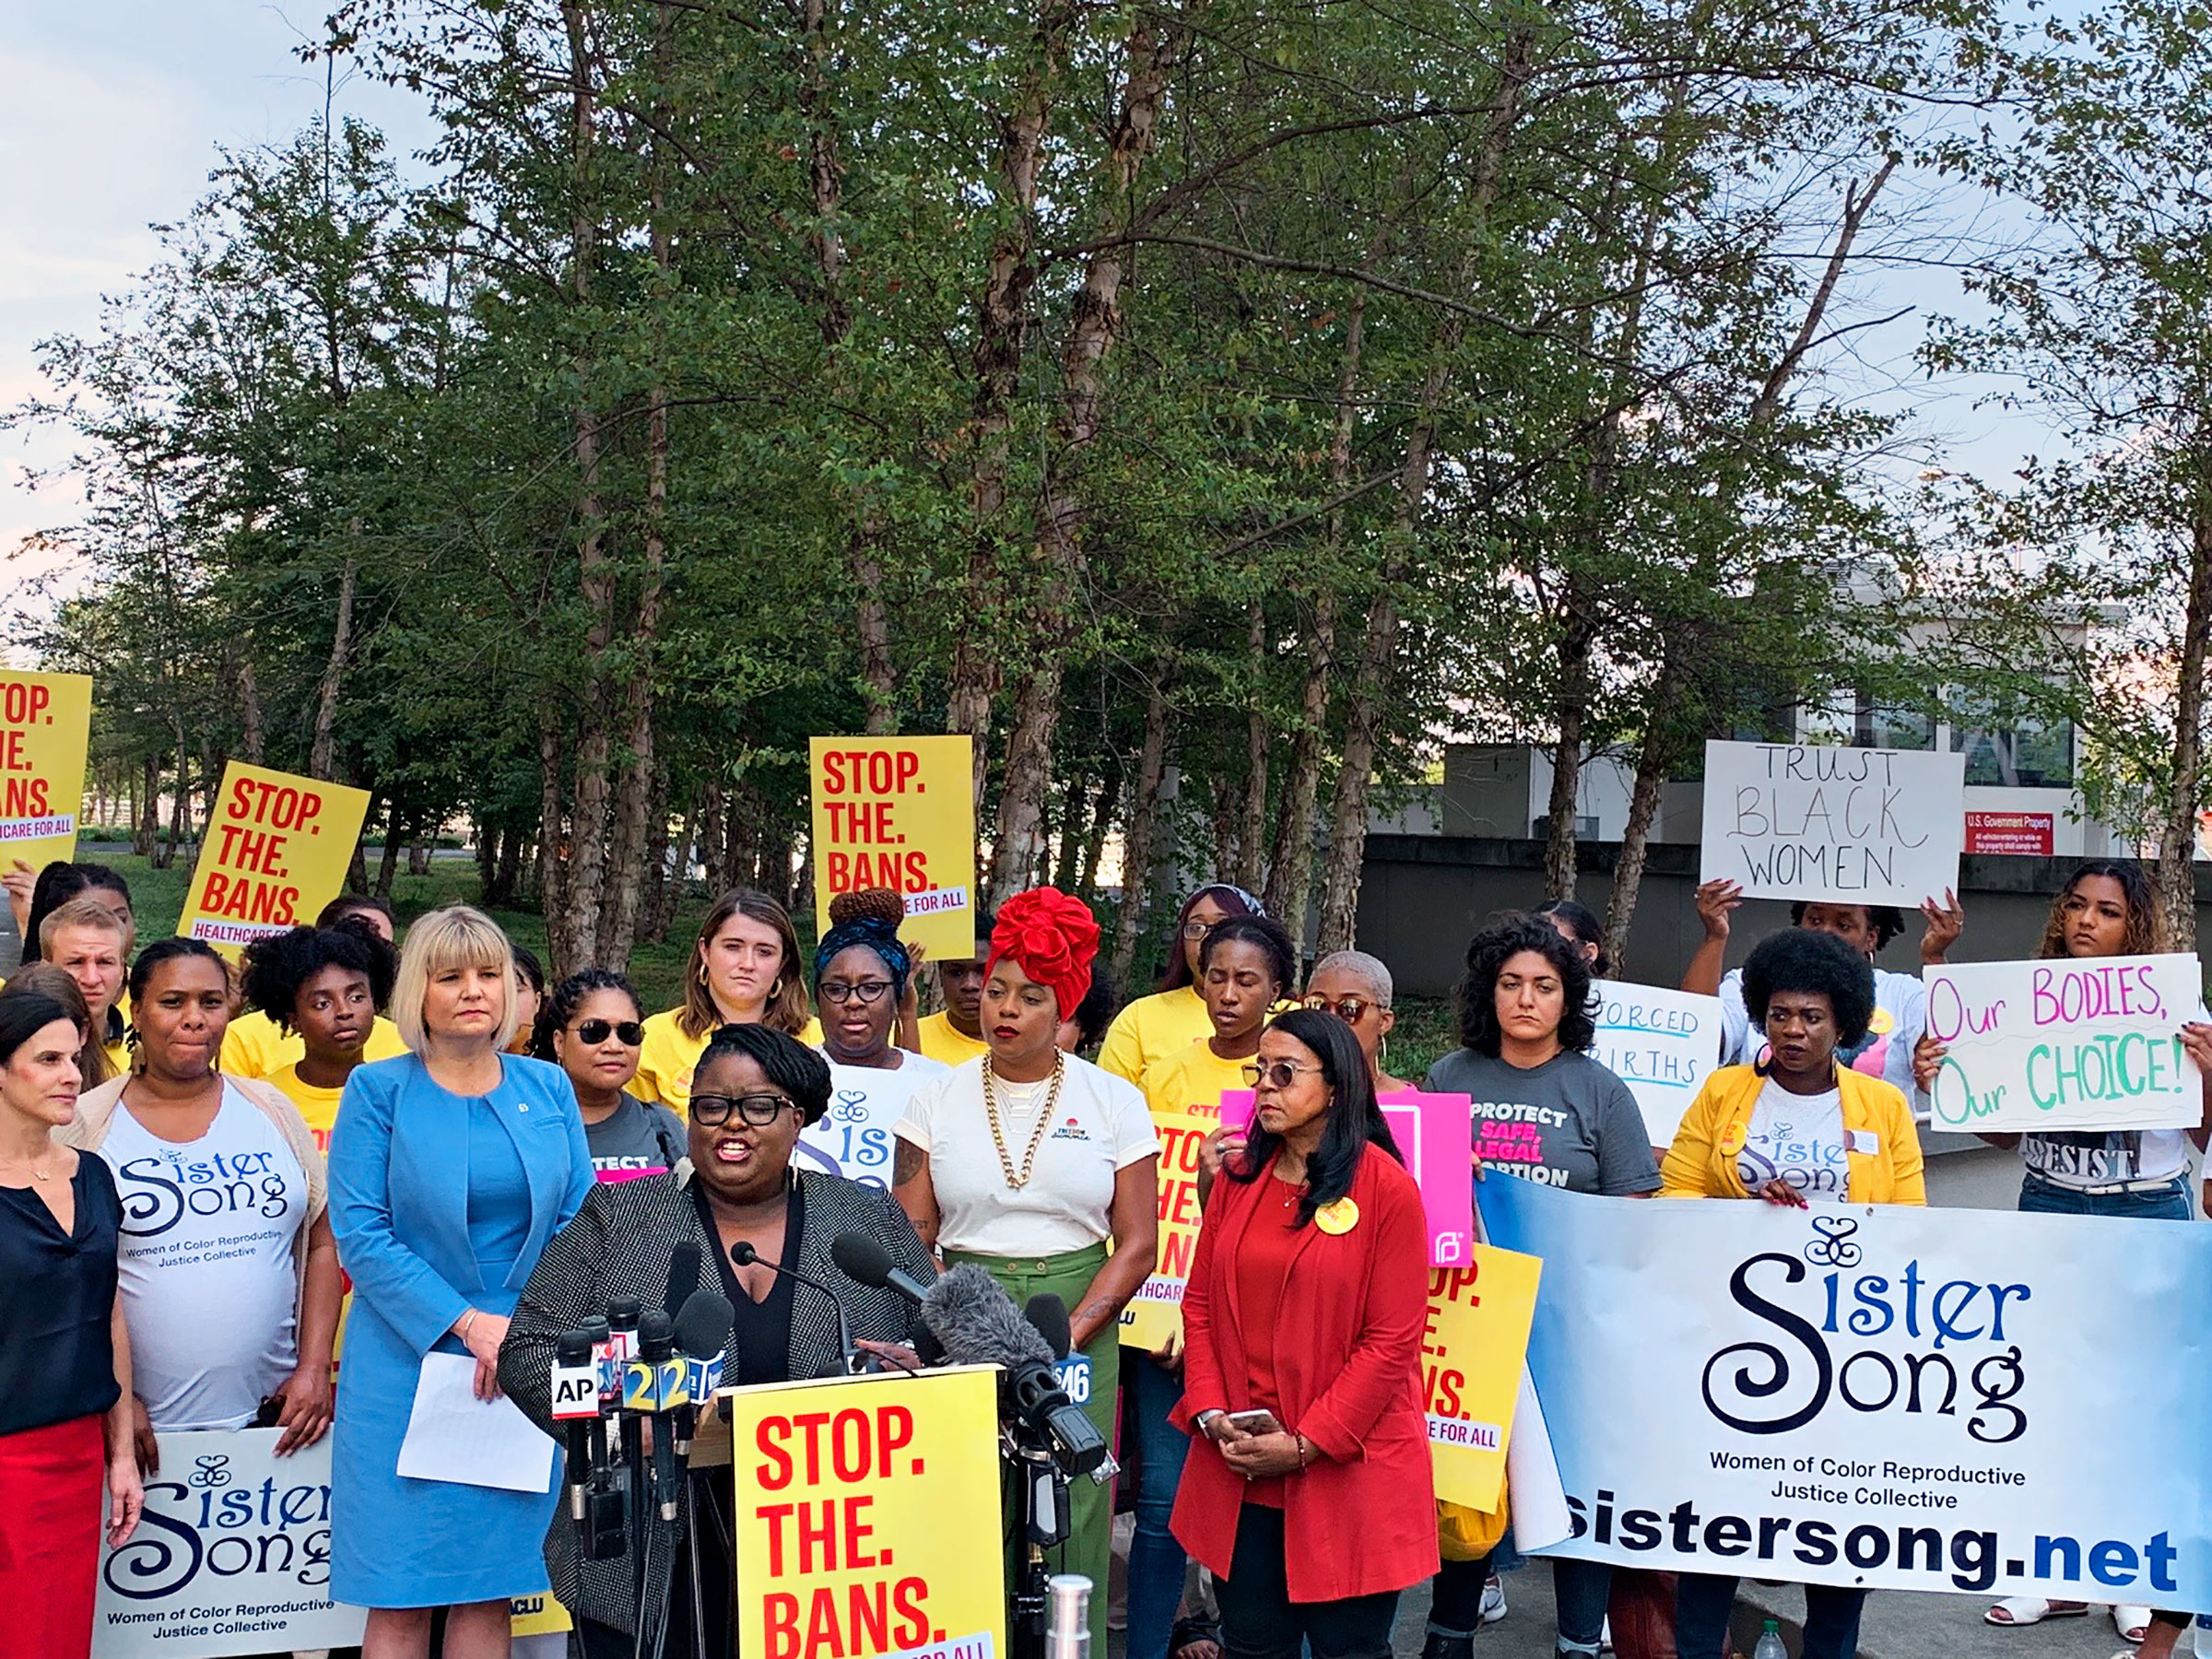 Simpson speaks about the lawsuit challenging Georgia’s abortion law, on June 28 (Oreoluwa Adegboyega—SisterSong)